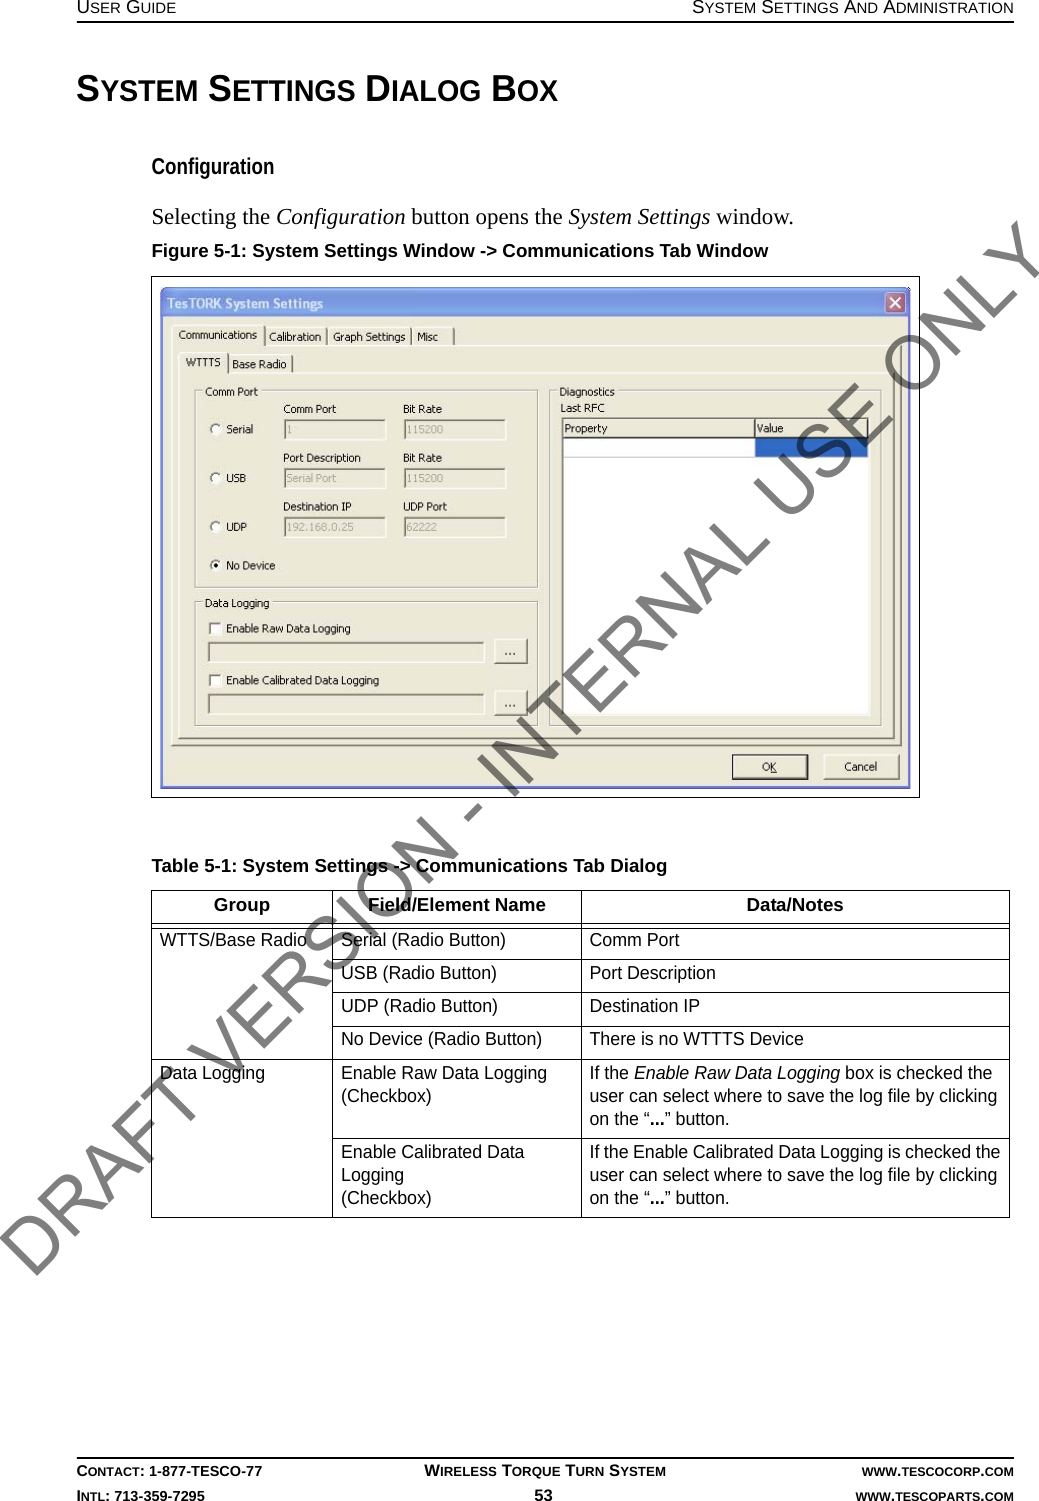 USER GUIDE SYSTEM SETTINGS AND ADMINISTRATIONCONTACT: 1-877-TESCO-77 WIRELESS TORQUE TURN SYSTEM WWW.TESCOCORP.COMINTL: 713-359-7295 53    WWW.TESCOPARTS.COMSYSTEM SETTINGS DIALOG BOXConfigurationSelecting the Configuration button opens the System Settings window.Figure 5-1: System Settings Window -&gt; Communications Tab WindowTable 5-1: System Settings -&gt; Communications Tab Dialog Group Field/Element Name Data/NotesWTTS/Base Radio Serial (Radio Button) Comm Port USB (Radio Button) Port Description UDP (Radio Button) Destination IPNo Device (Radio Button) There is no WTTTS DeviceData Logging Enable Raw Data Logging(Checkbox)If the Enable Raw Data Logging box is checked the user can select where to save the log file by clicking on the “...” button.Enable Calibrated Data Logging(Checkbox)If the Enable Calibrated Data Logging is checked the user can select where to save the log file by clicking on the “...” button.DRAFT VERSION - INTERNAL USE ONLY